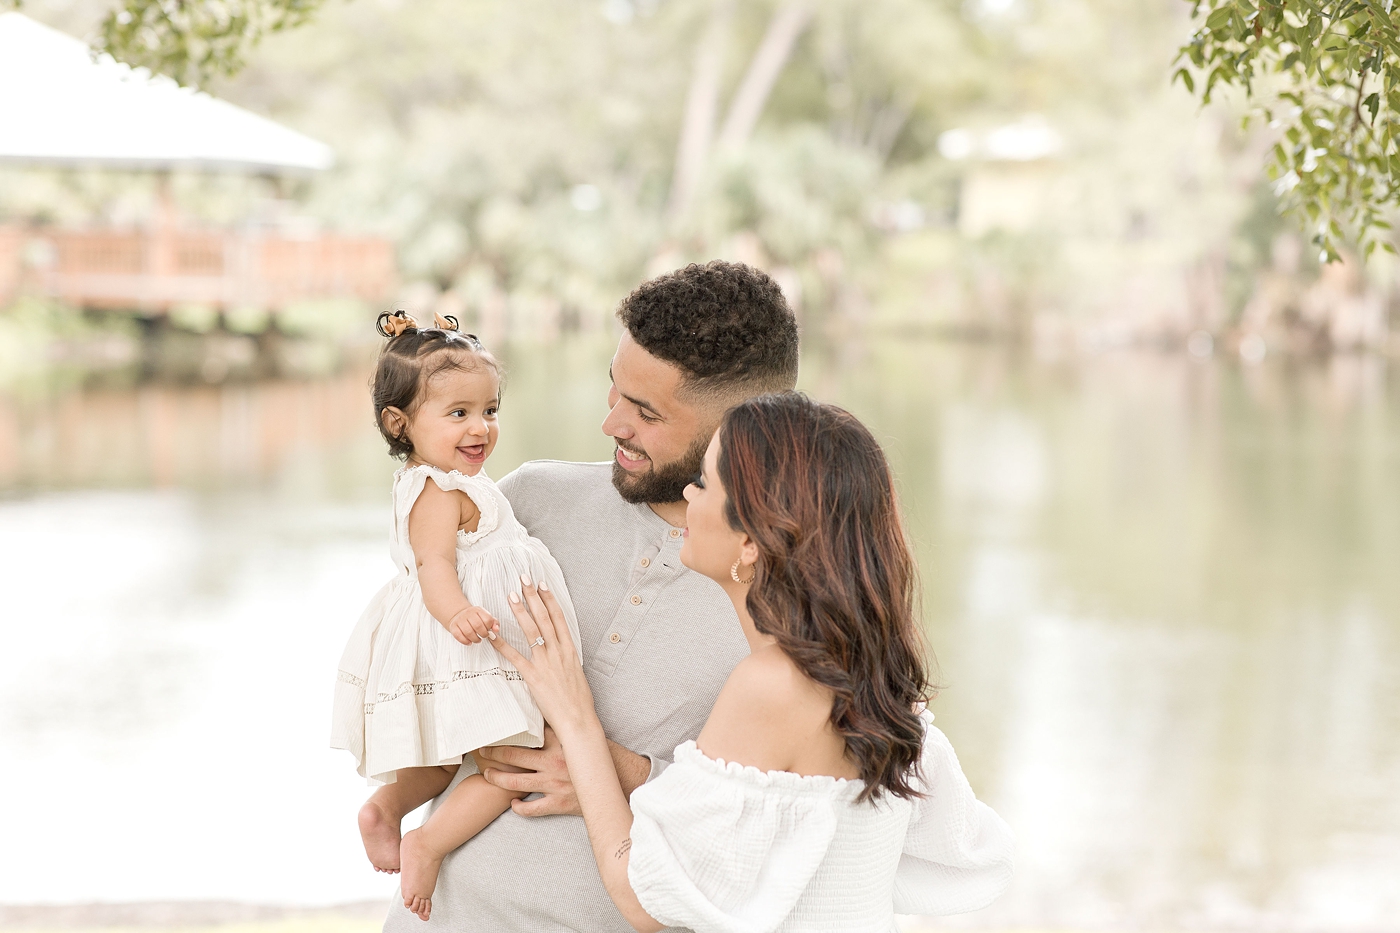 Little girl smiles as mom and dad make her laugh during baby photography miami session. Photo by Ivanna Vidal Photography.